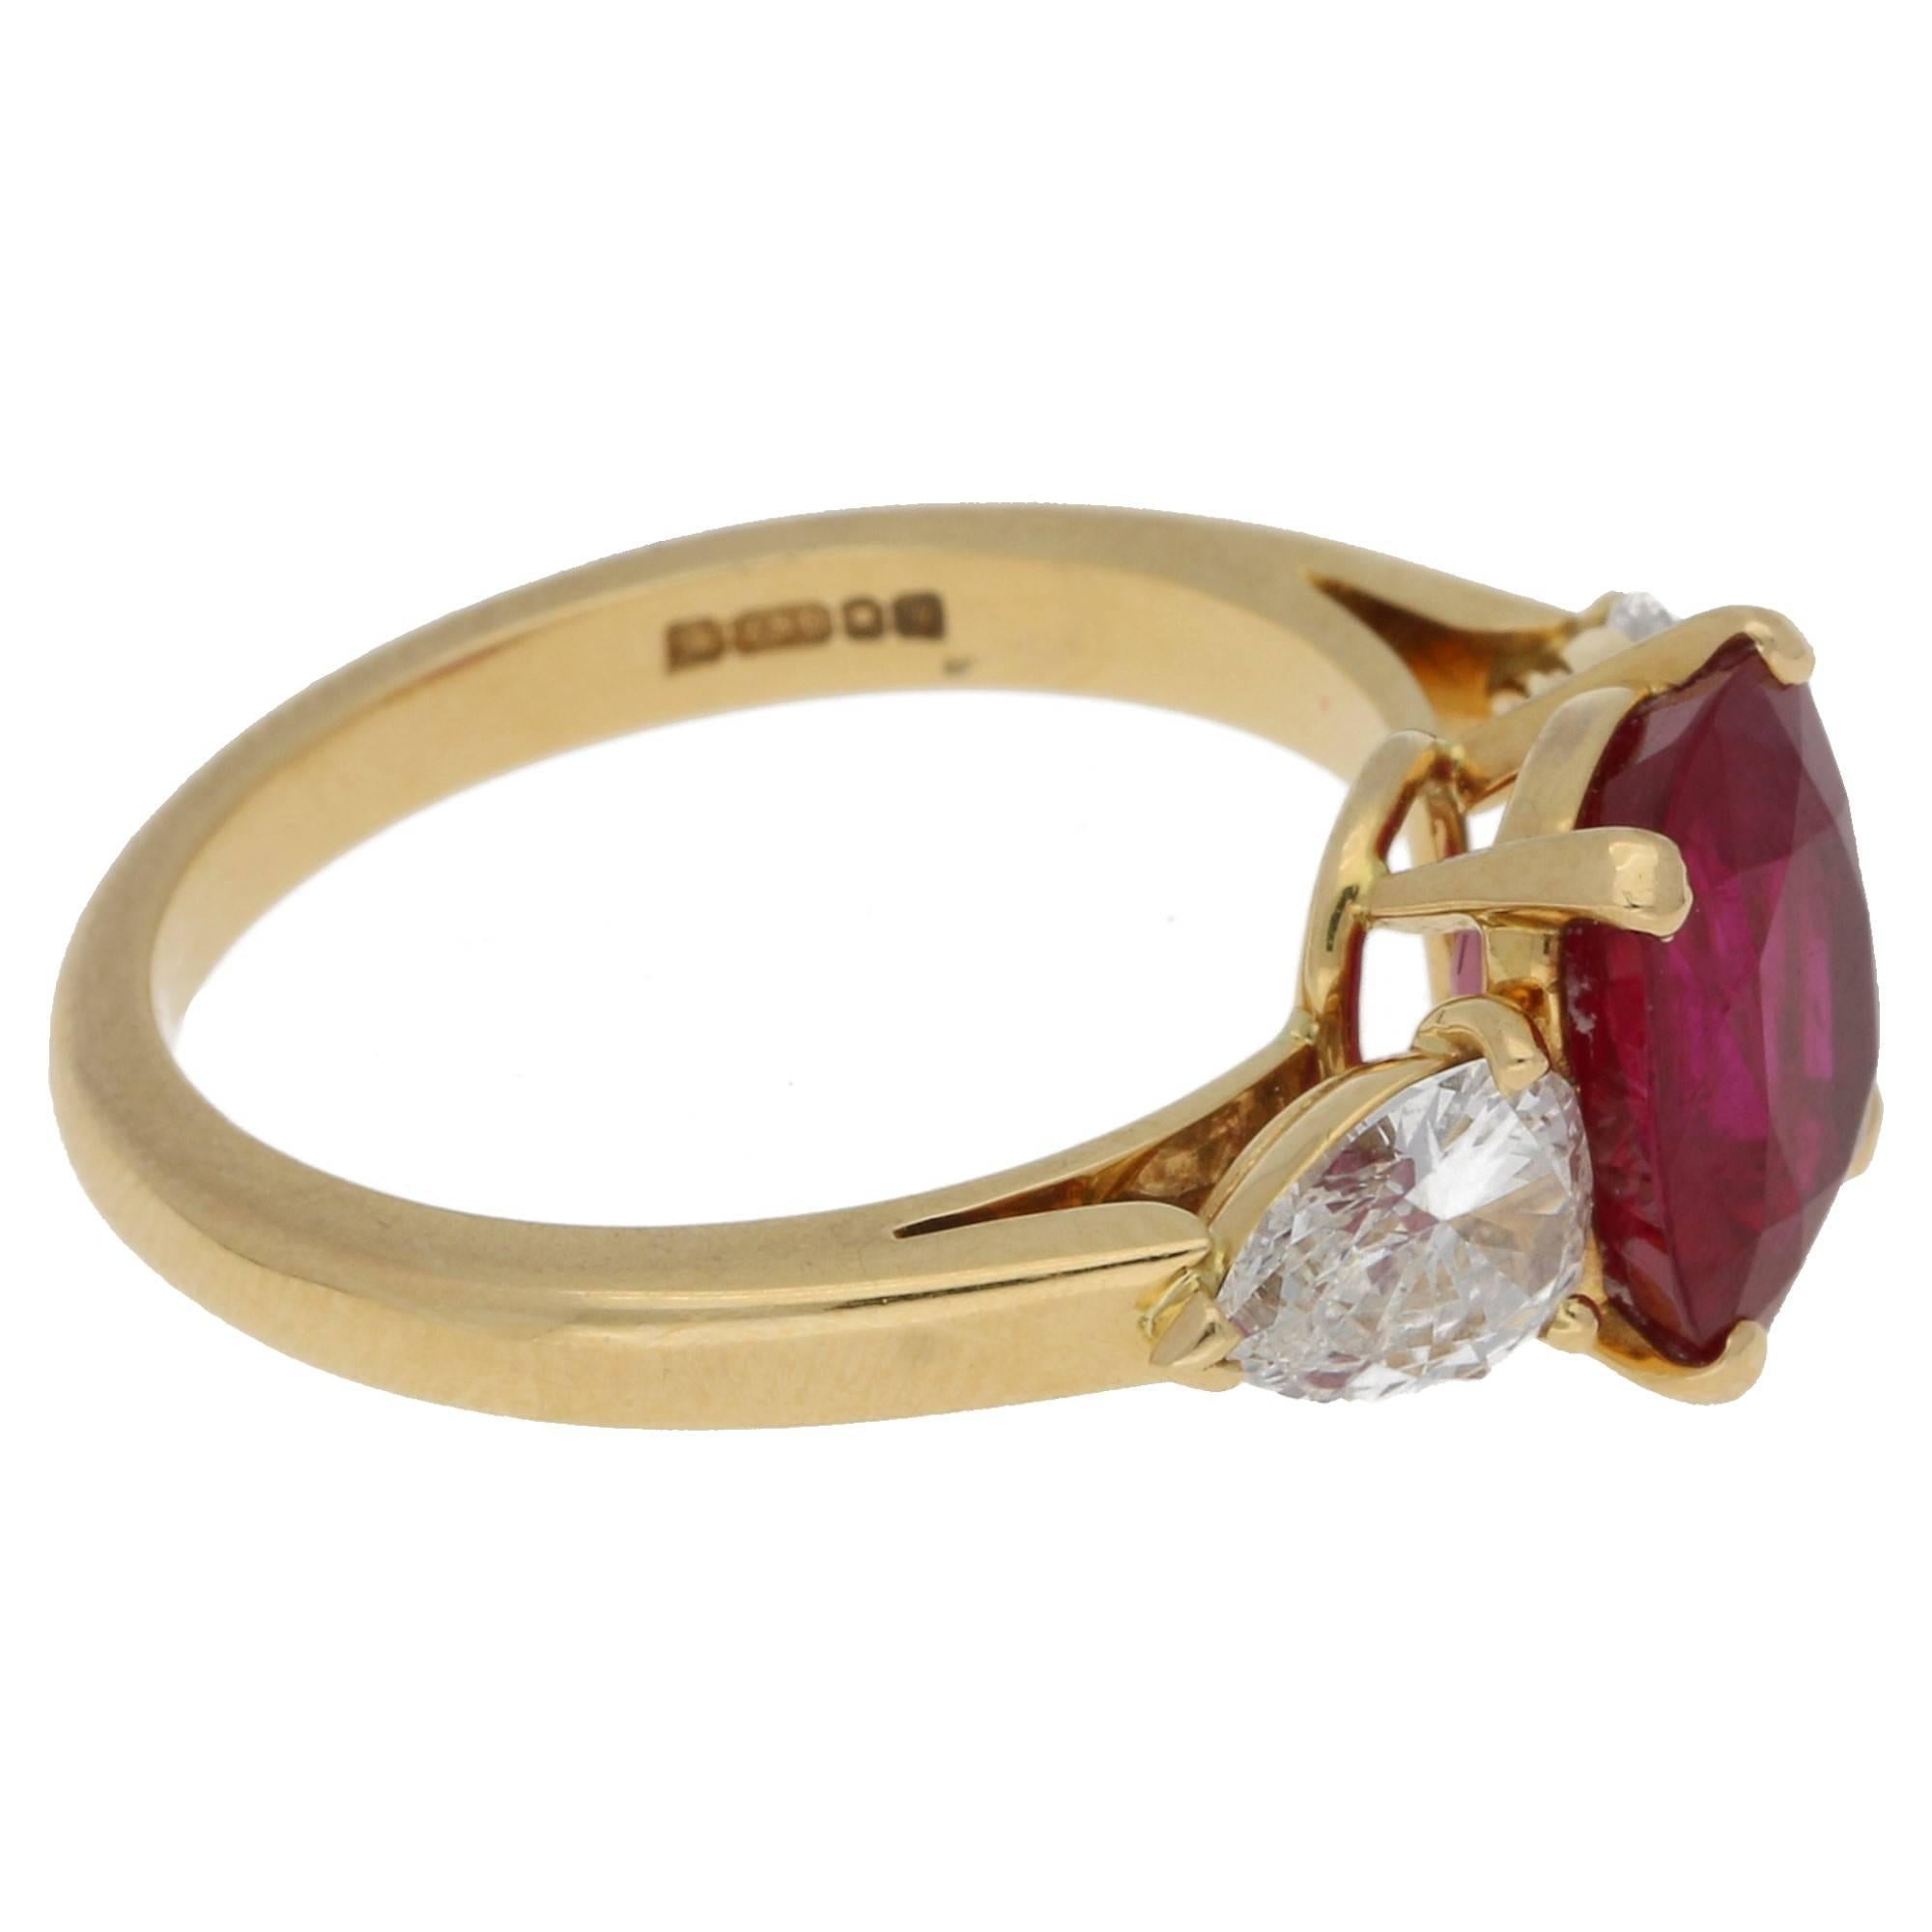 An astounding Burmese ruby and diamond engagement ring set in an 18k yellow gold. The central hand-cut cushion shaped Burmese ruby is four-claw set and accompanied by a Gubelin Certificate.  The central stone is then flanked by two impeccably